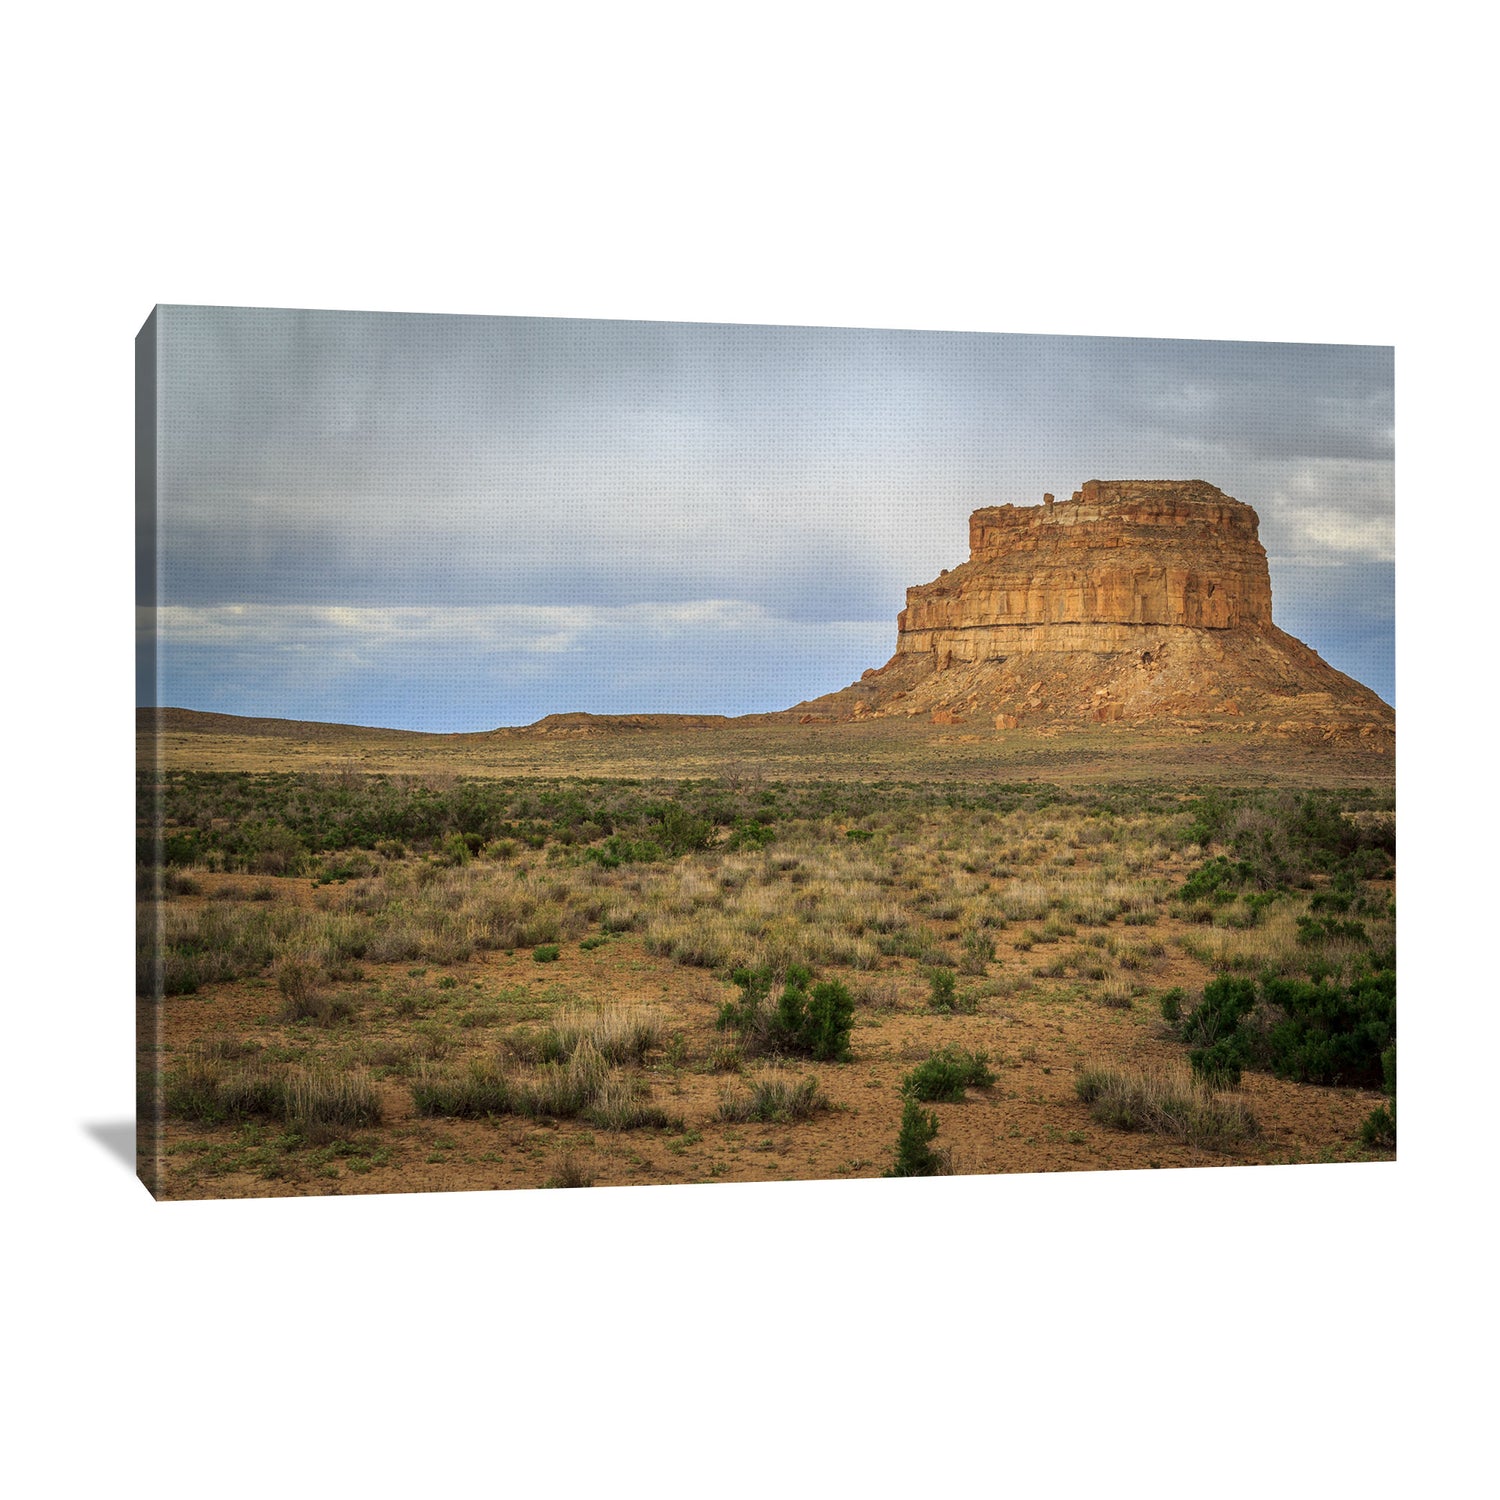 Fajada Butte at CChaco Culture National Park in New Mexico